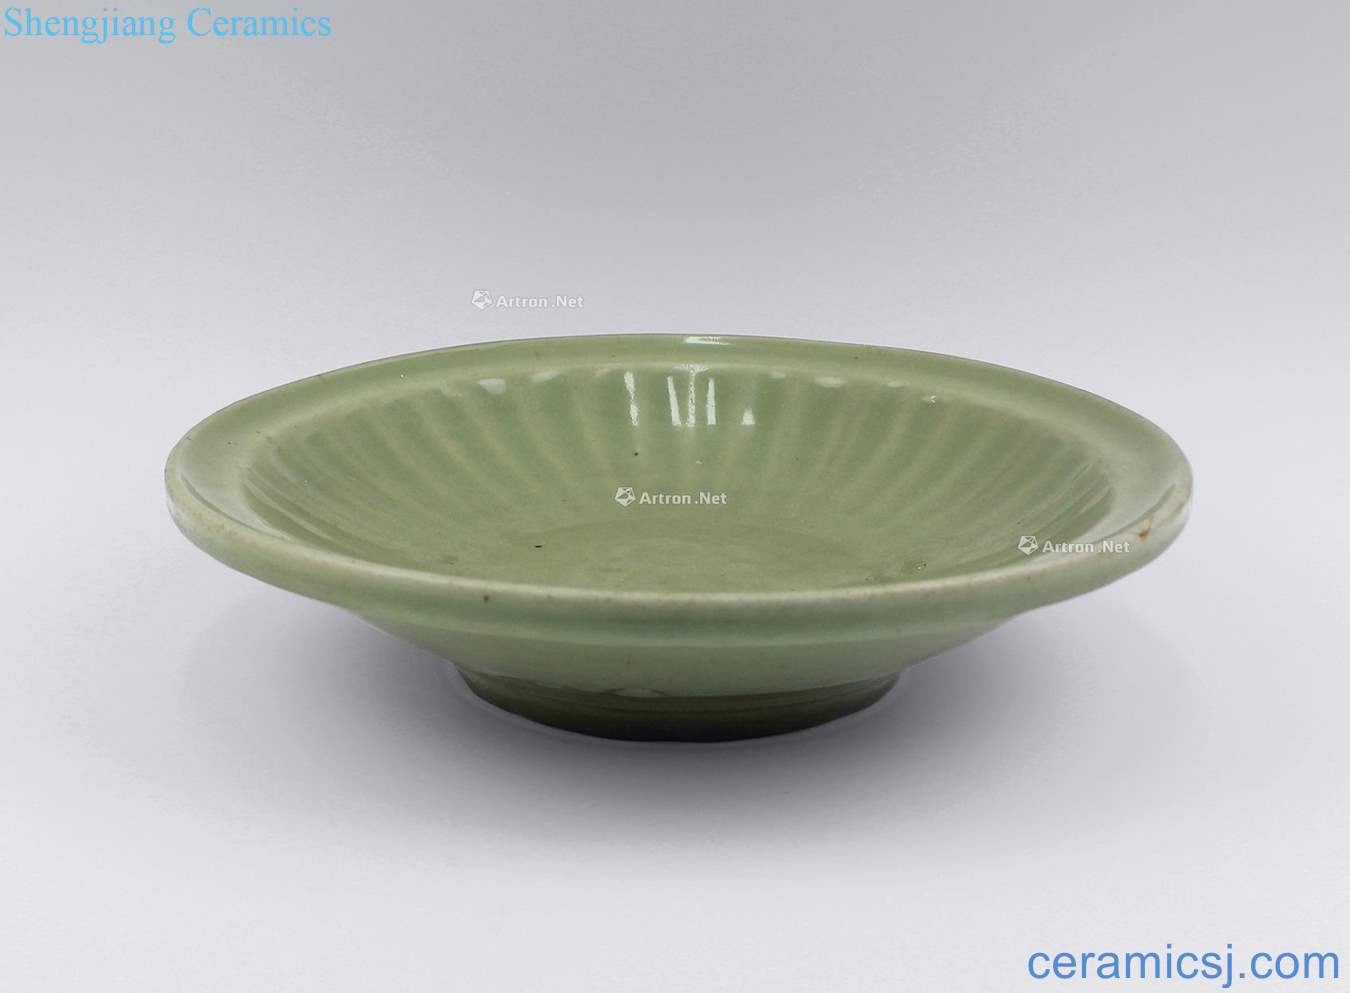 The song dynasty Longquan celadon plate